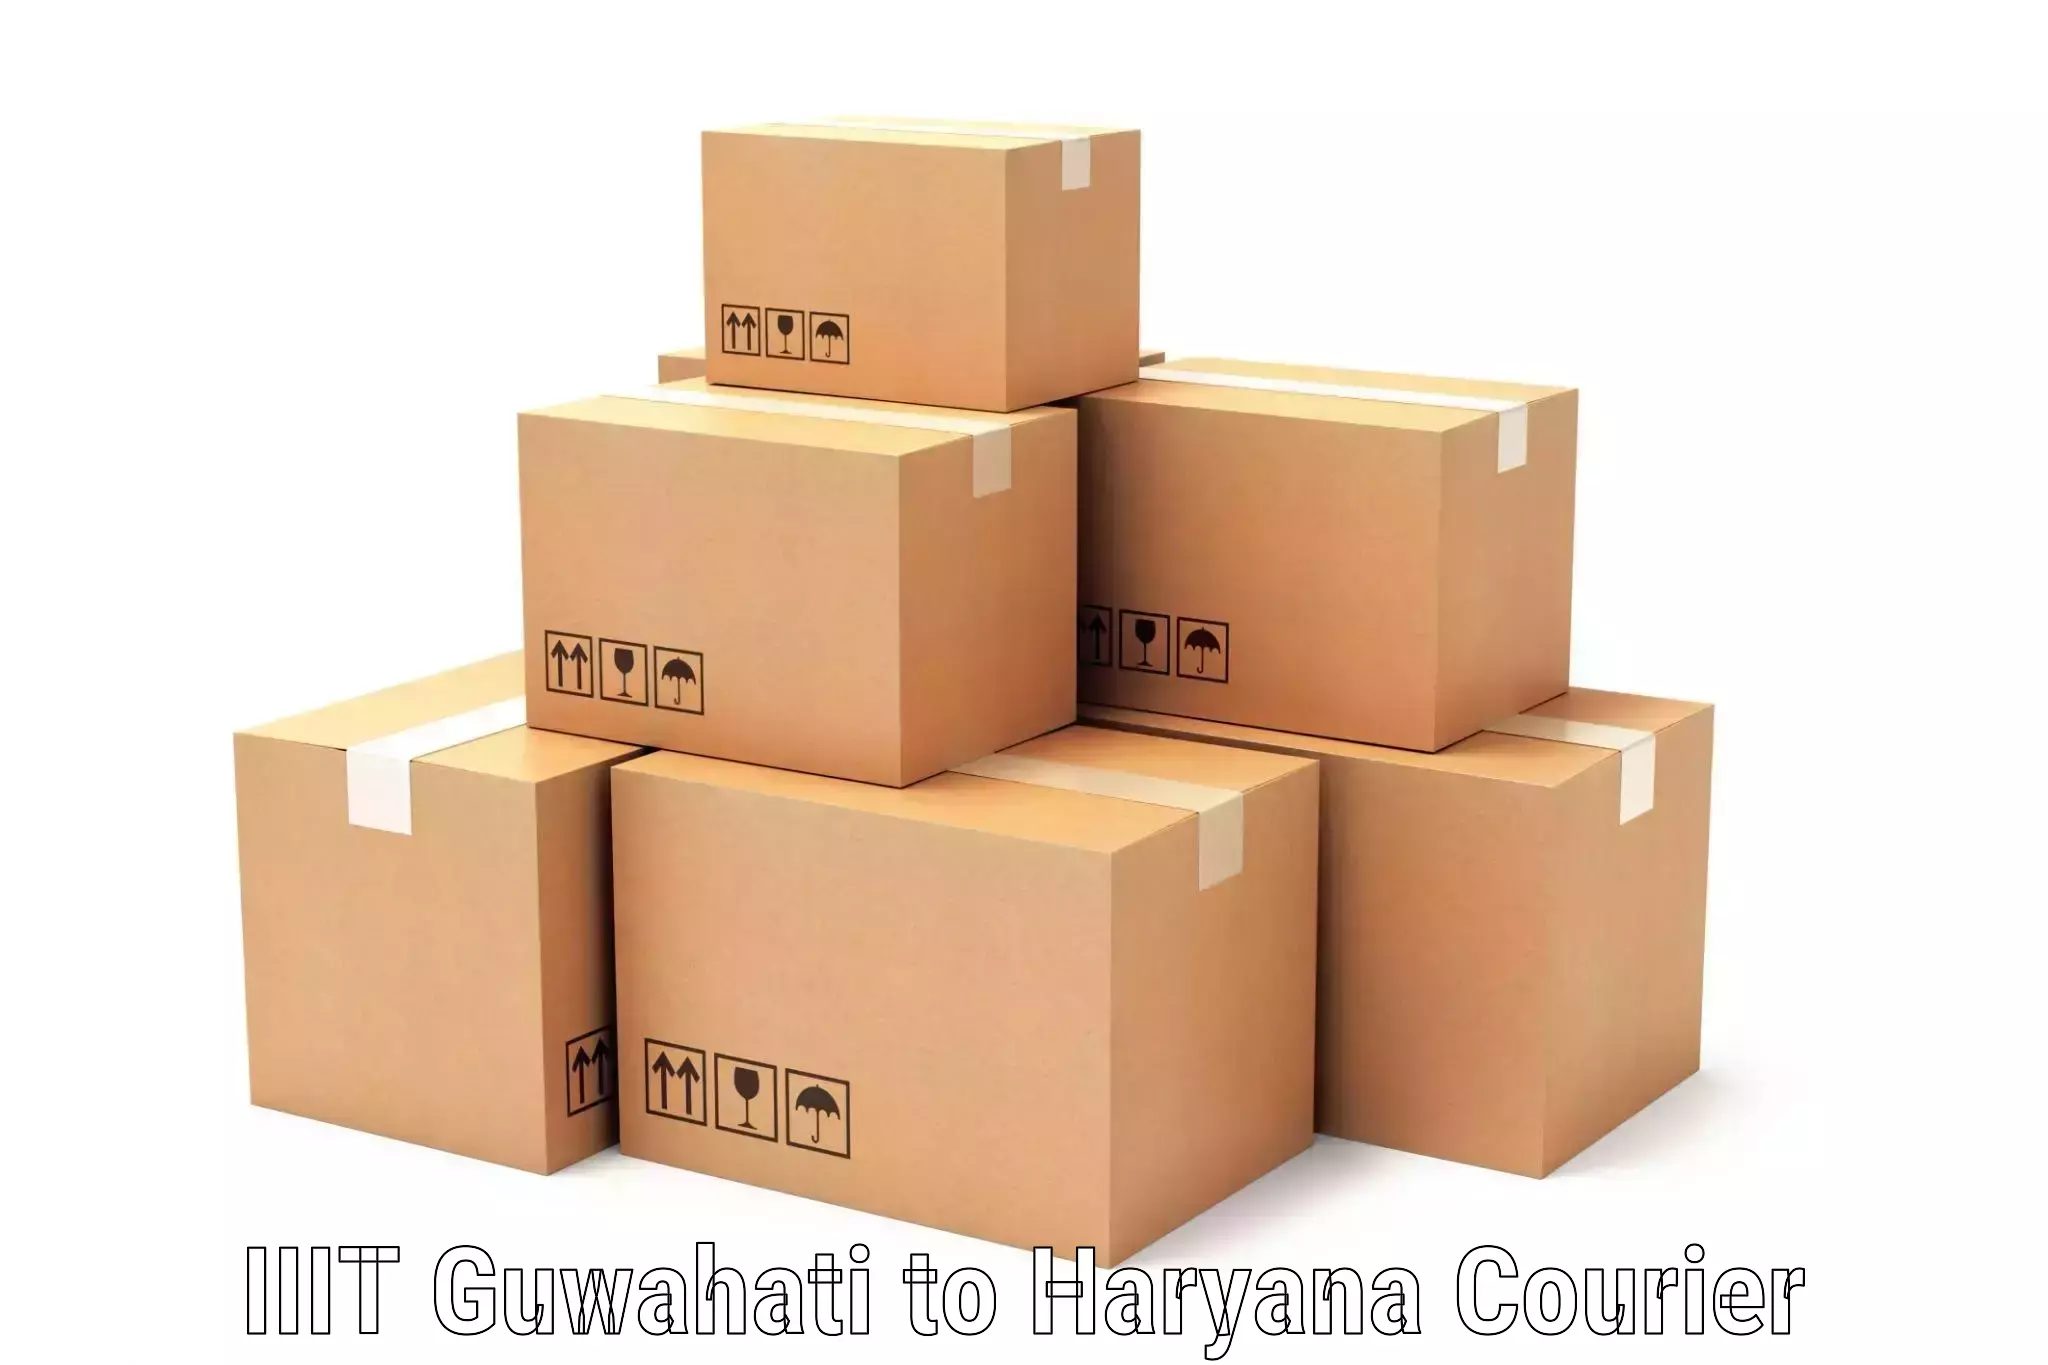 Courier services IIIT Guwahati to Sonipat